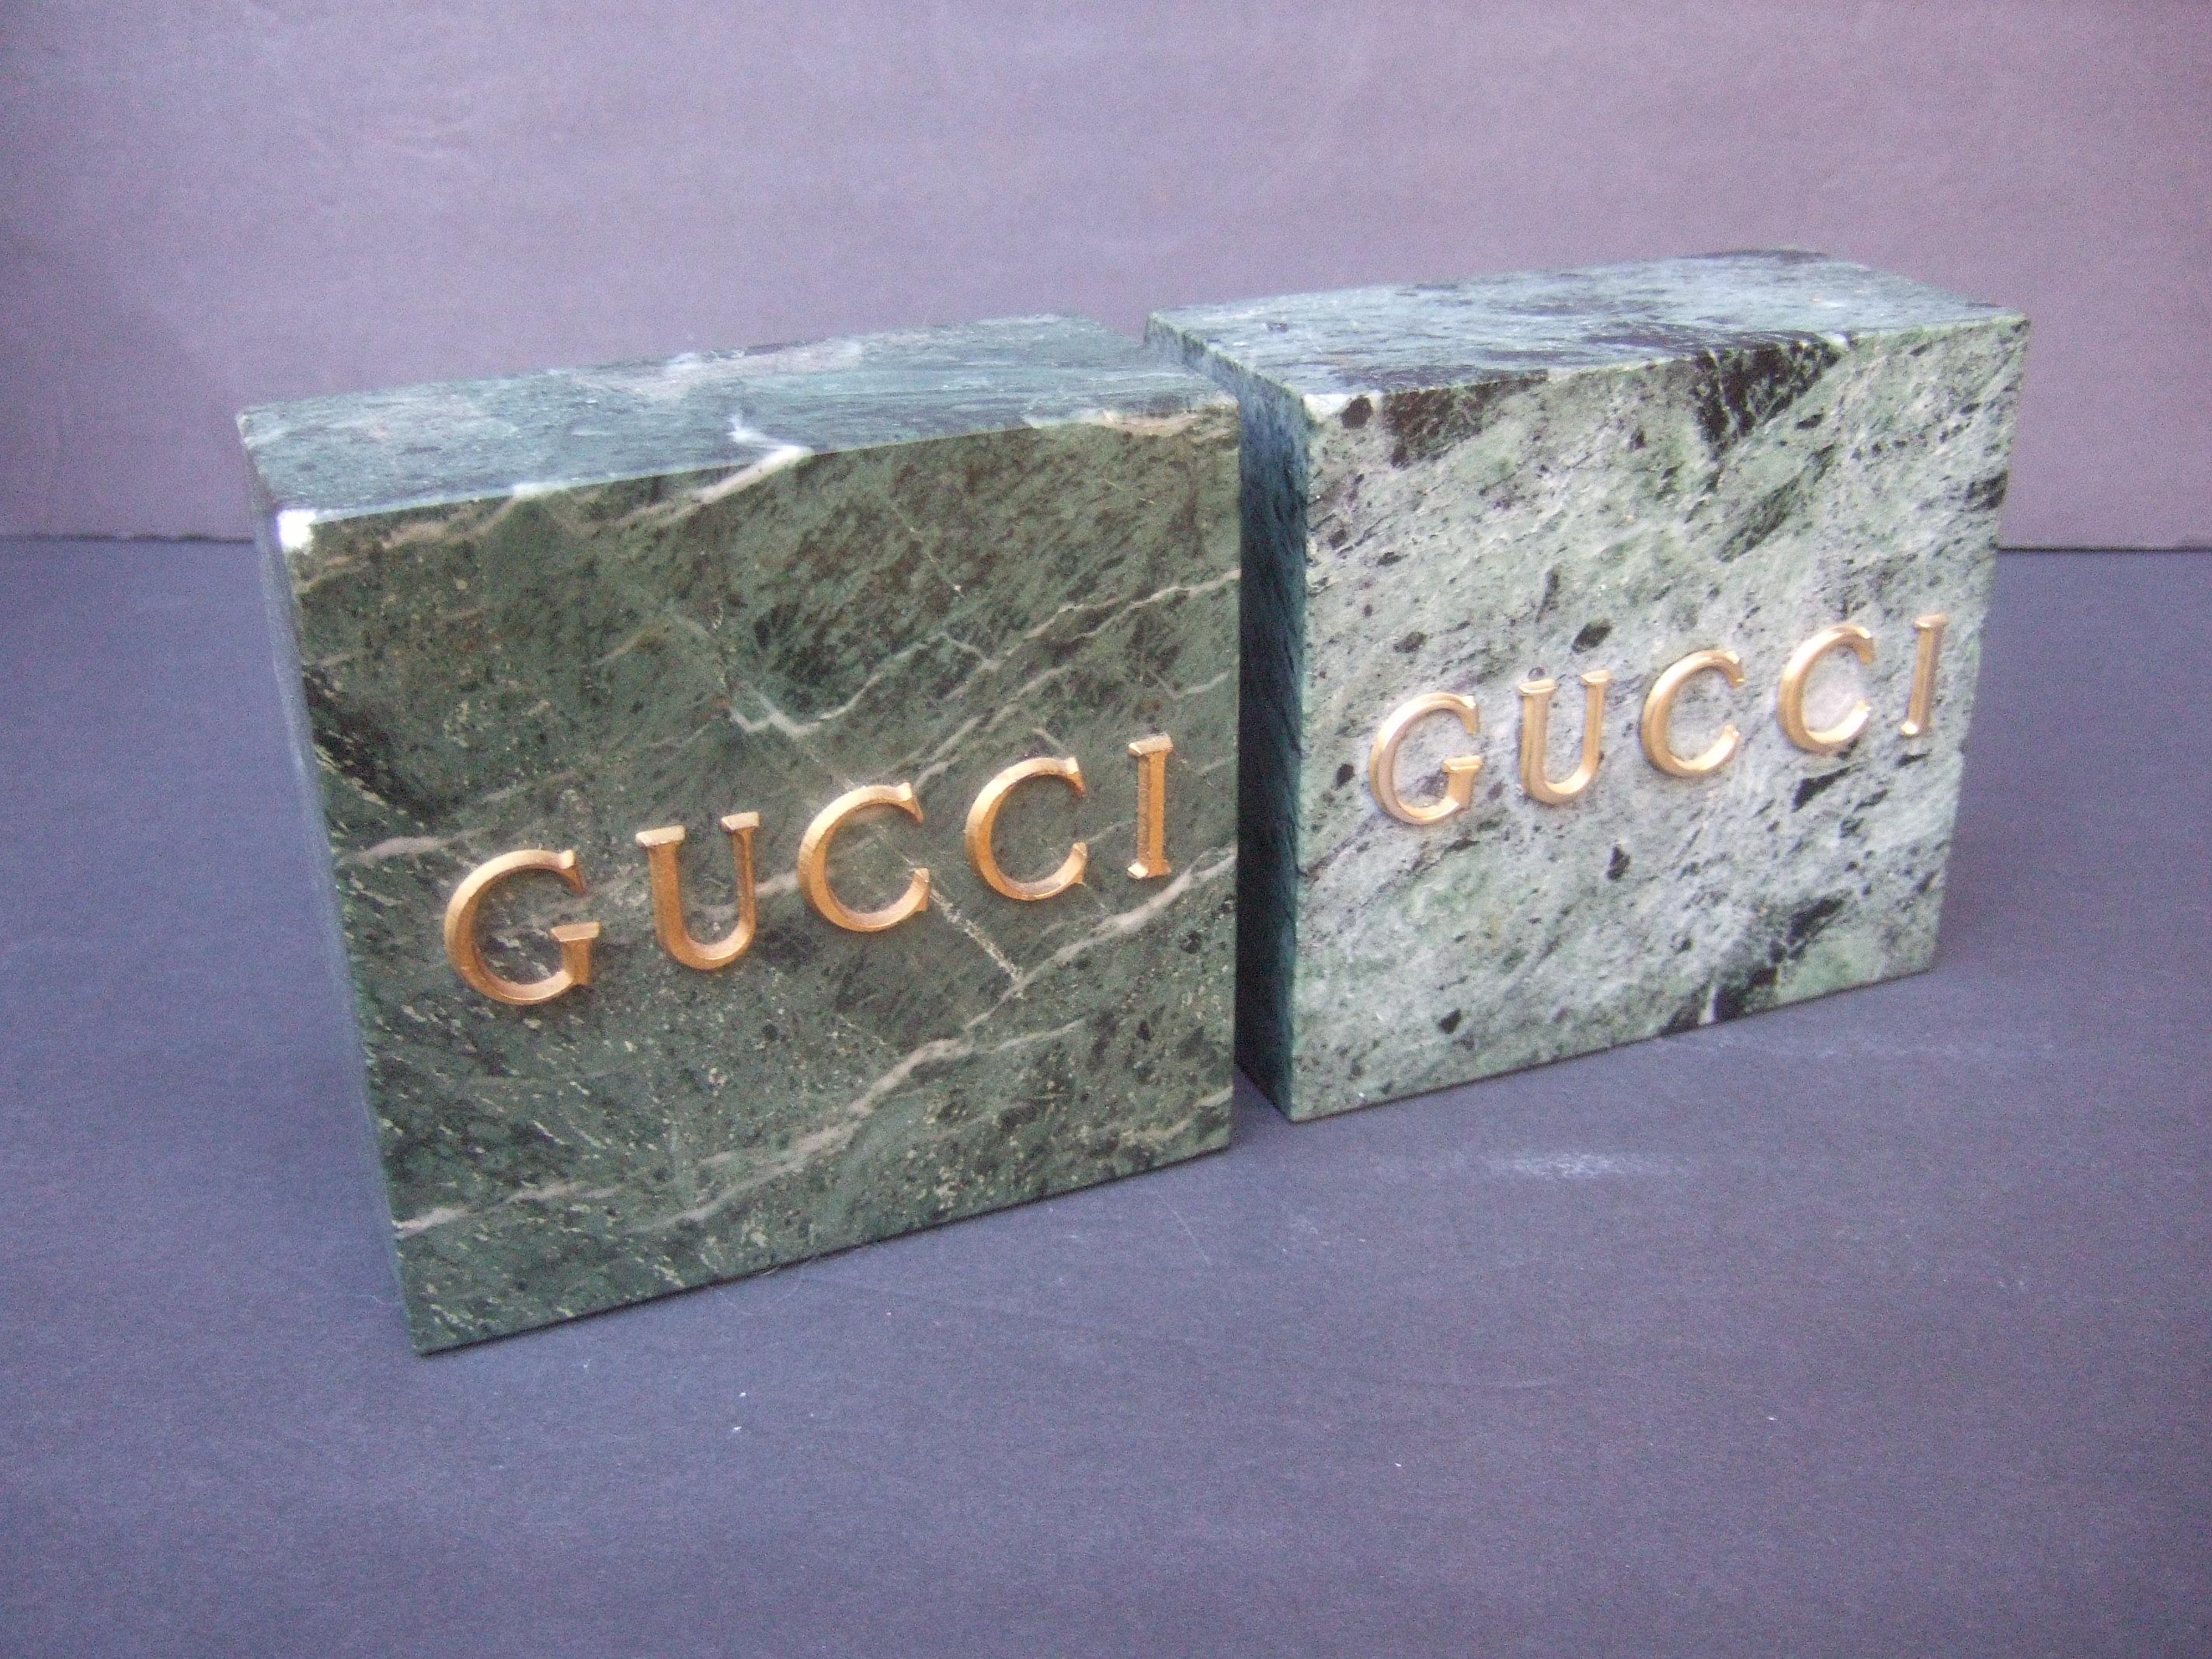 Gucci Pair of Green Marble Stone Bookends / Decorative Objects c 1970s 2